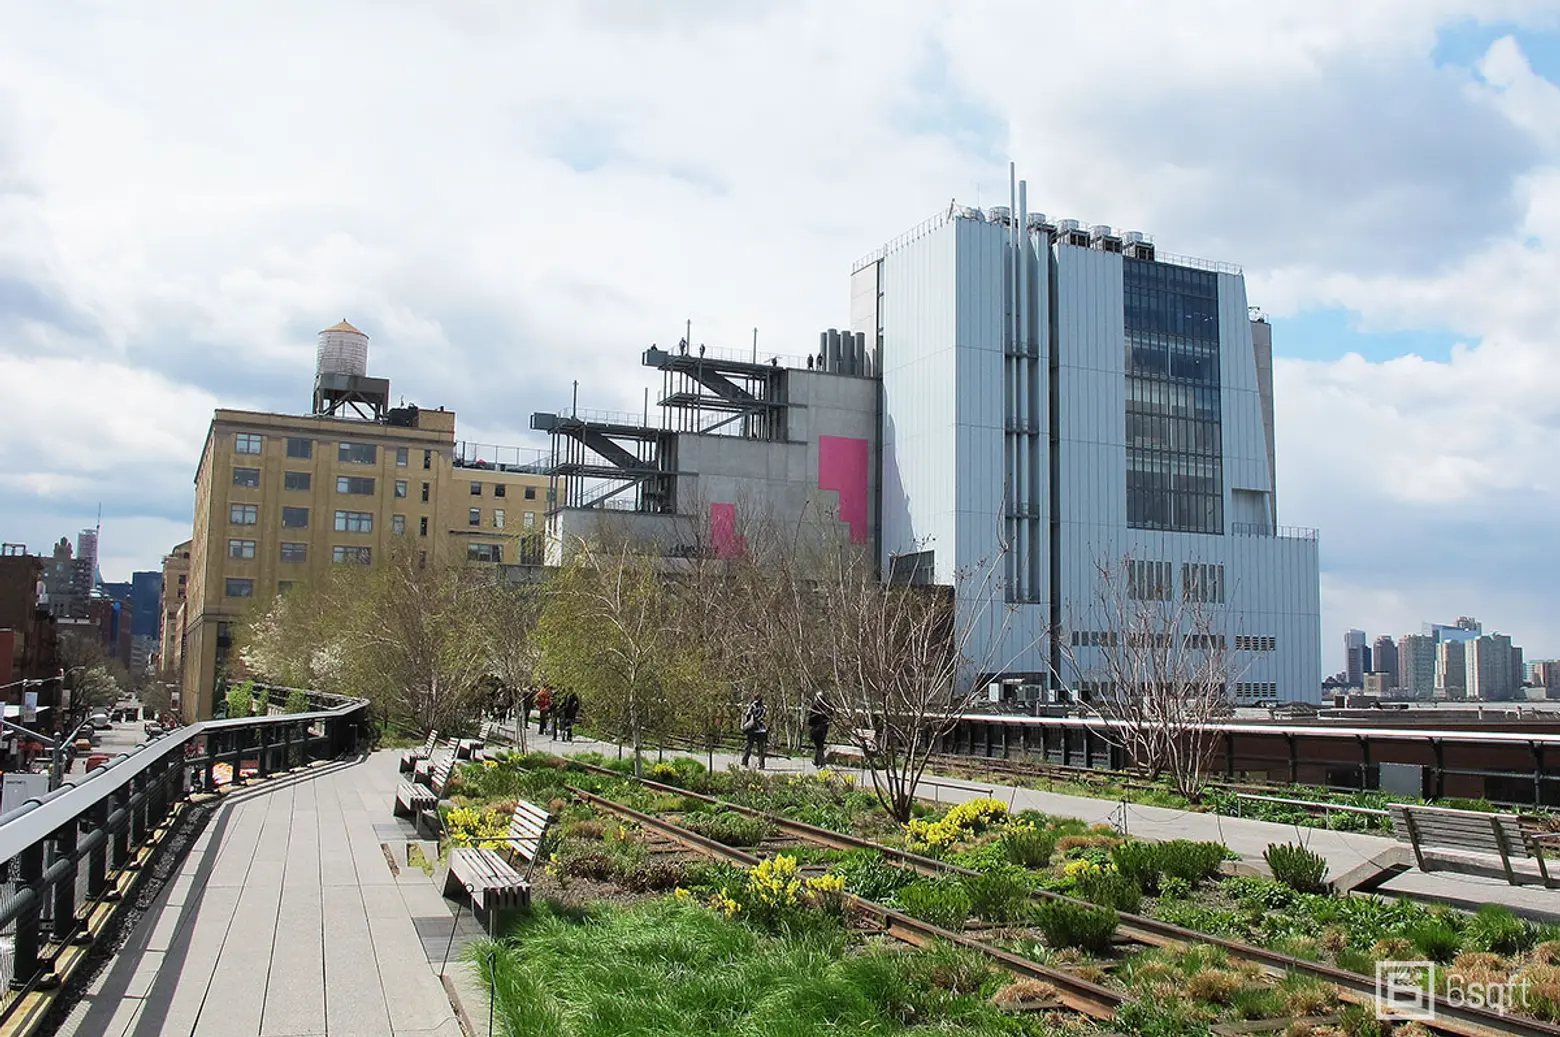 EXCLUSIVE PHOTOS: Take a Tour Inside the Brand New Whitney Museum!